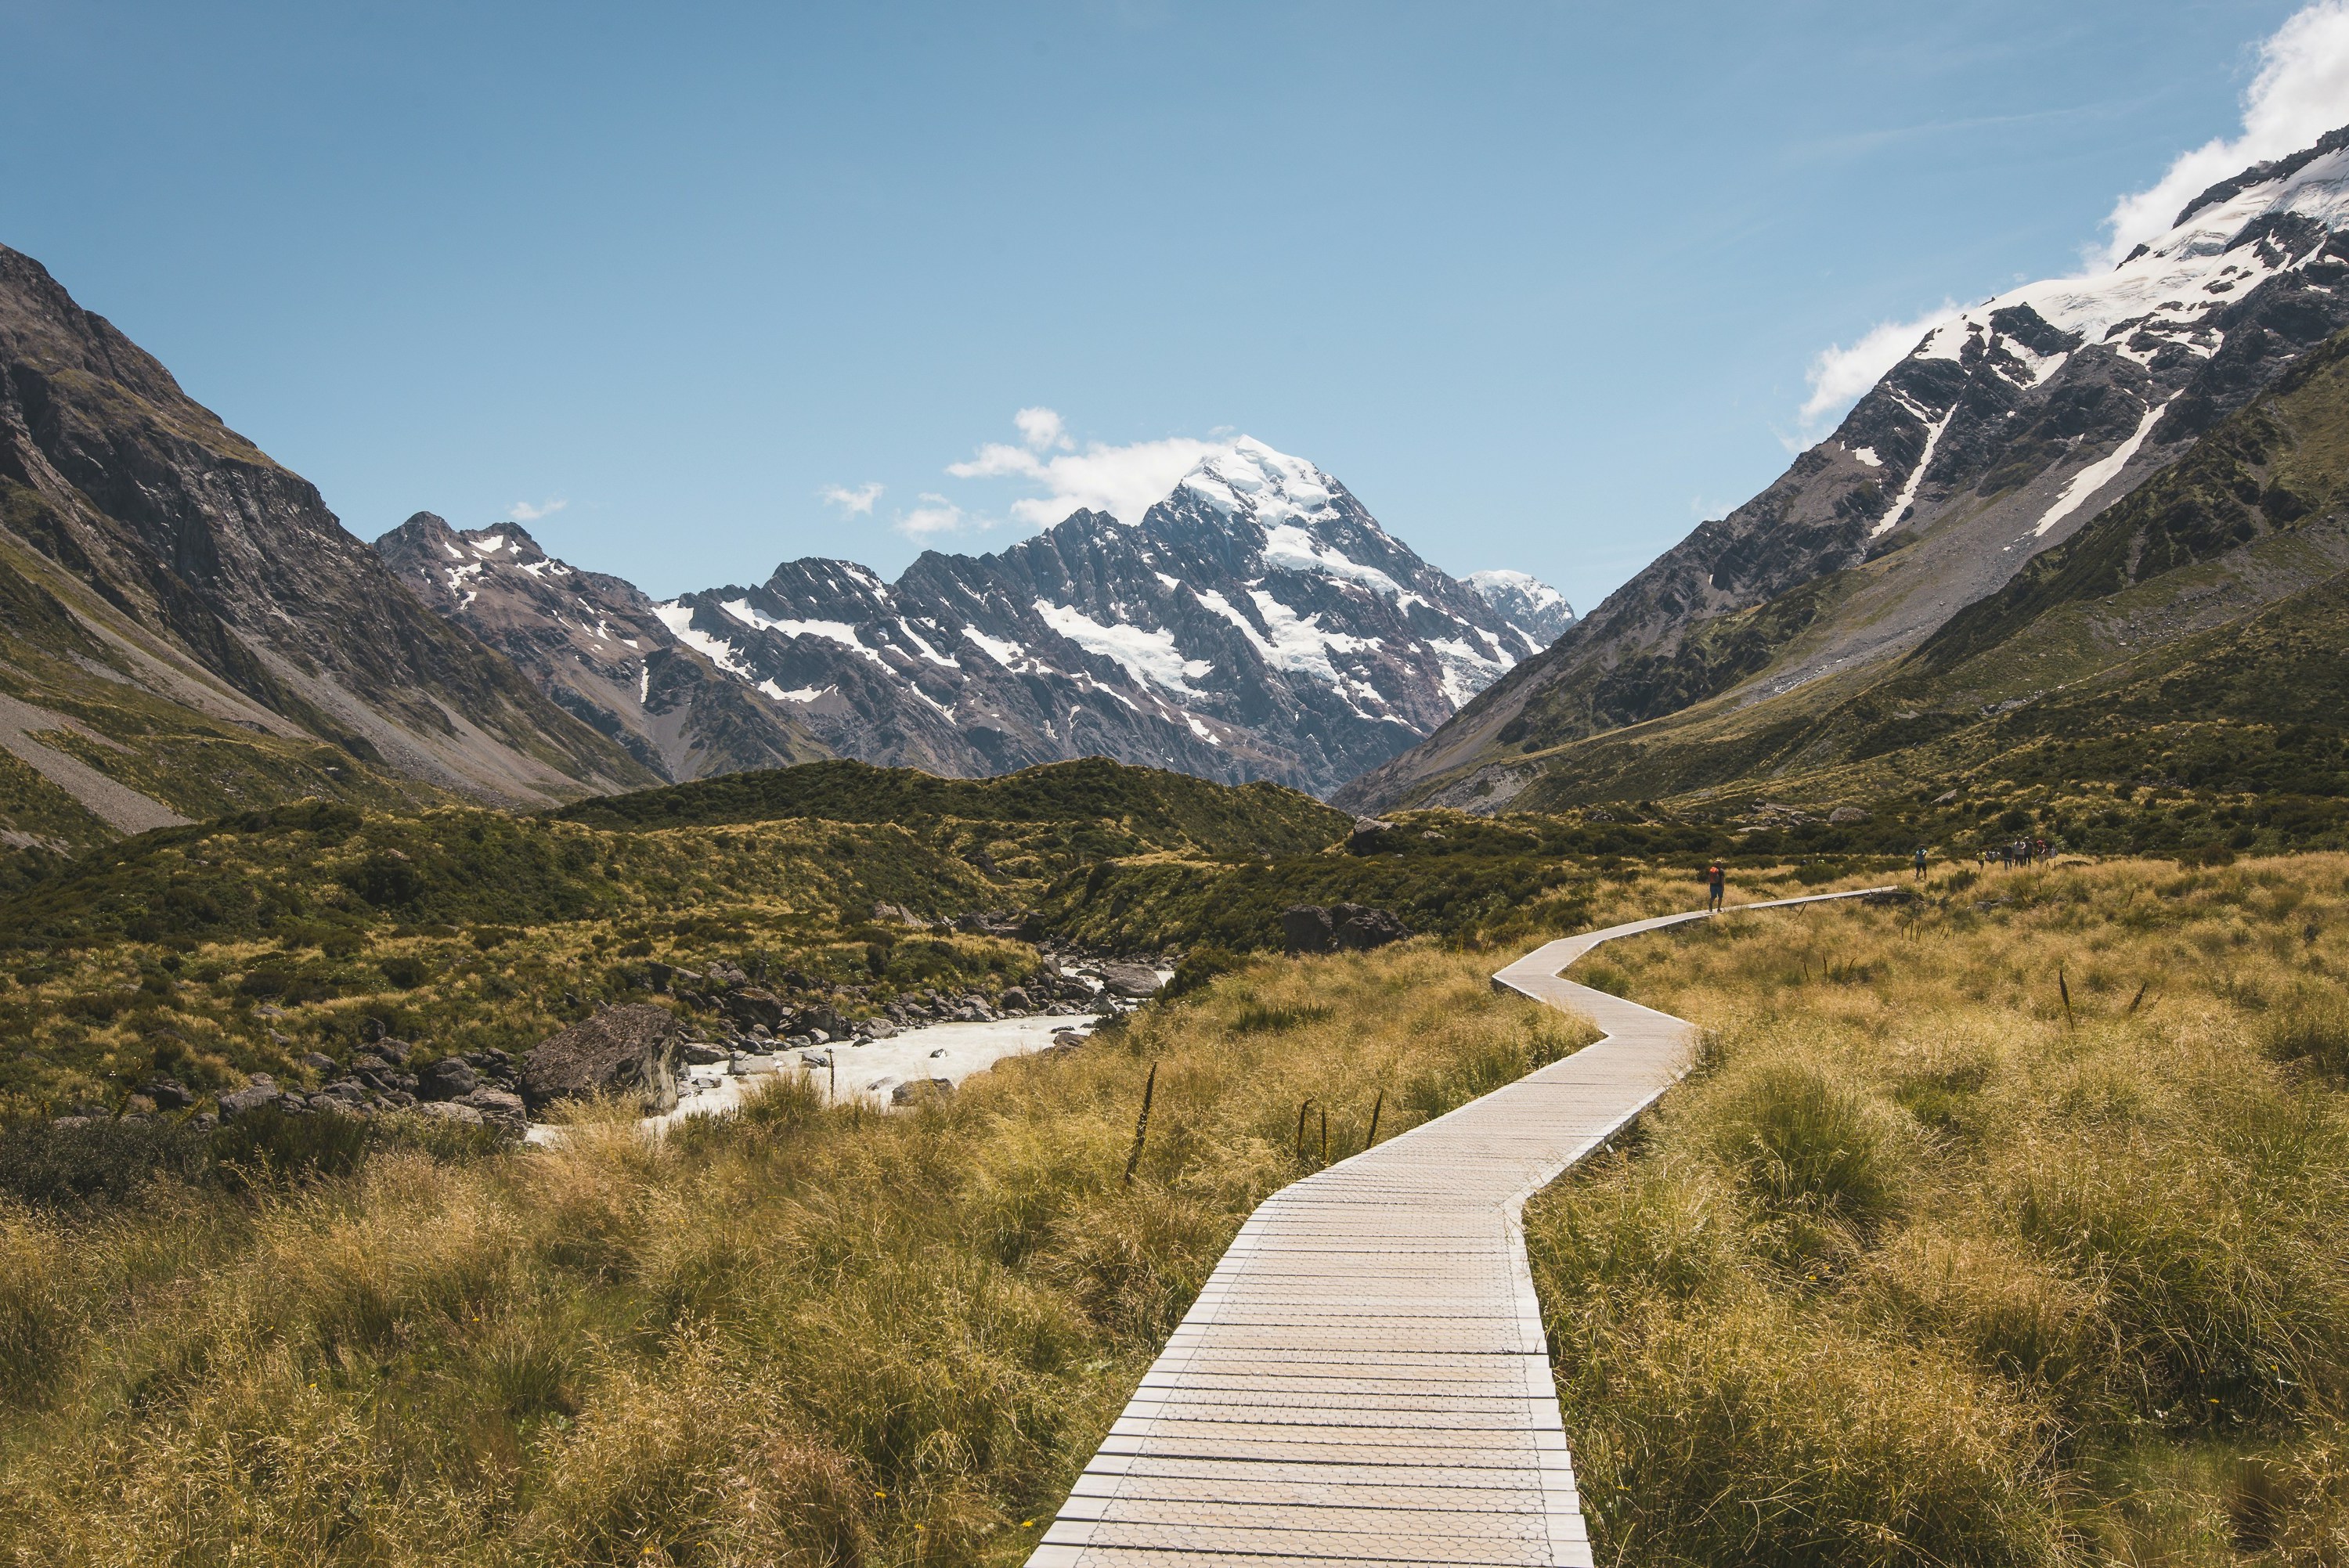 Hikers walking into the distance on a boardwalk through a picturesque New Zealand alpine scene.